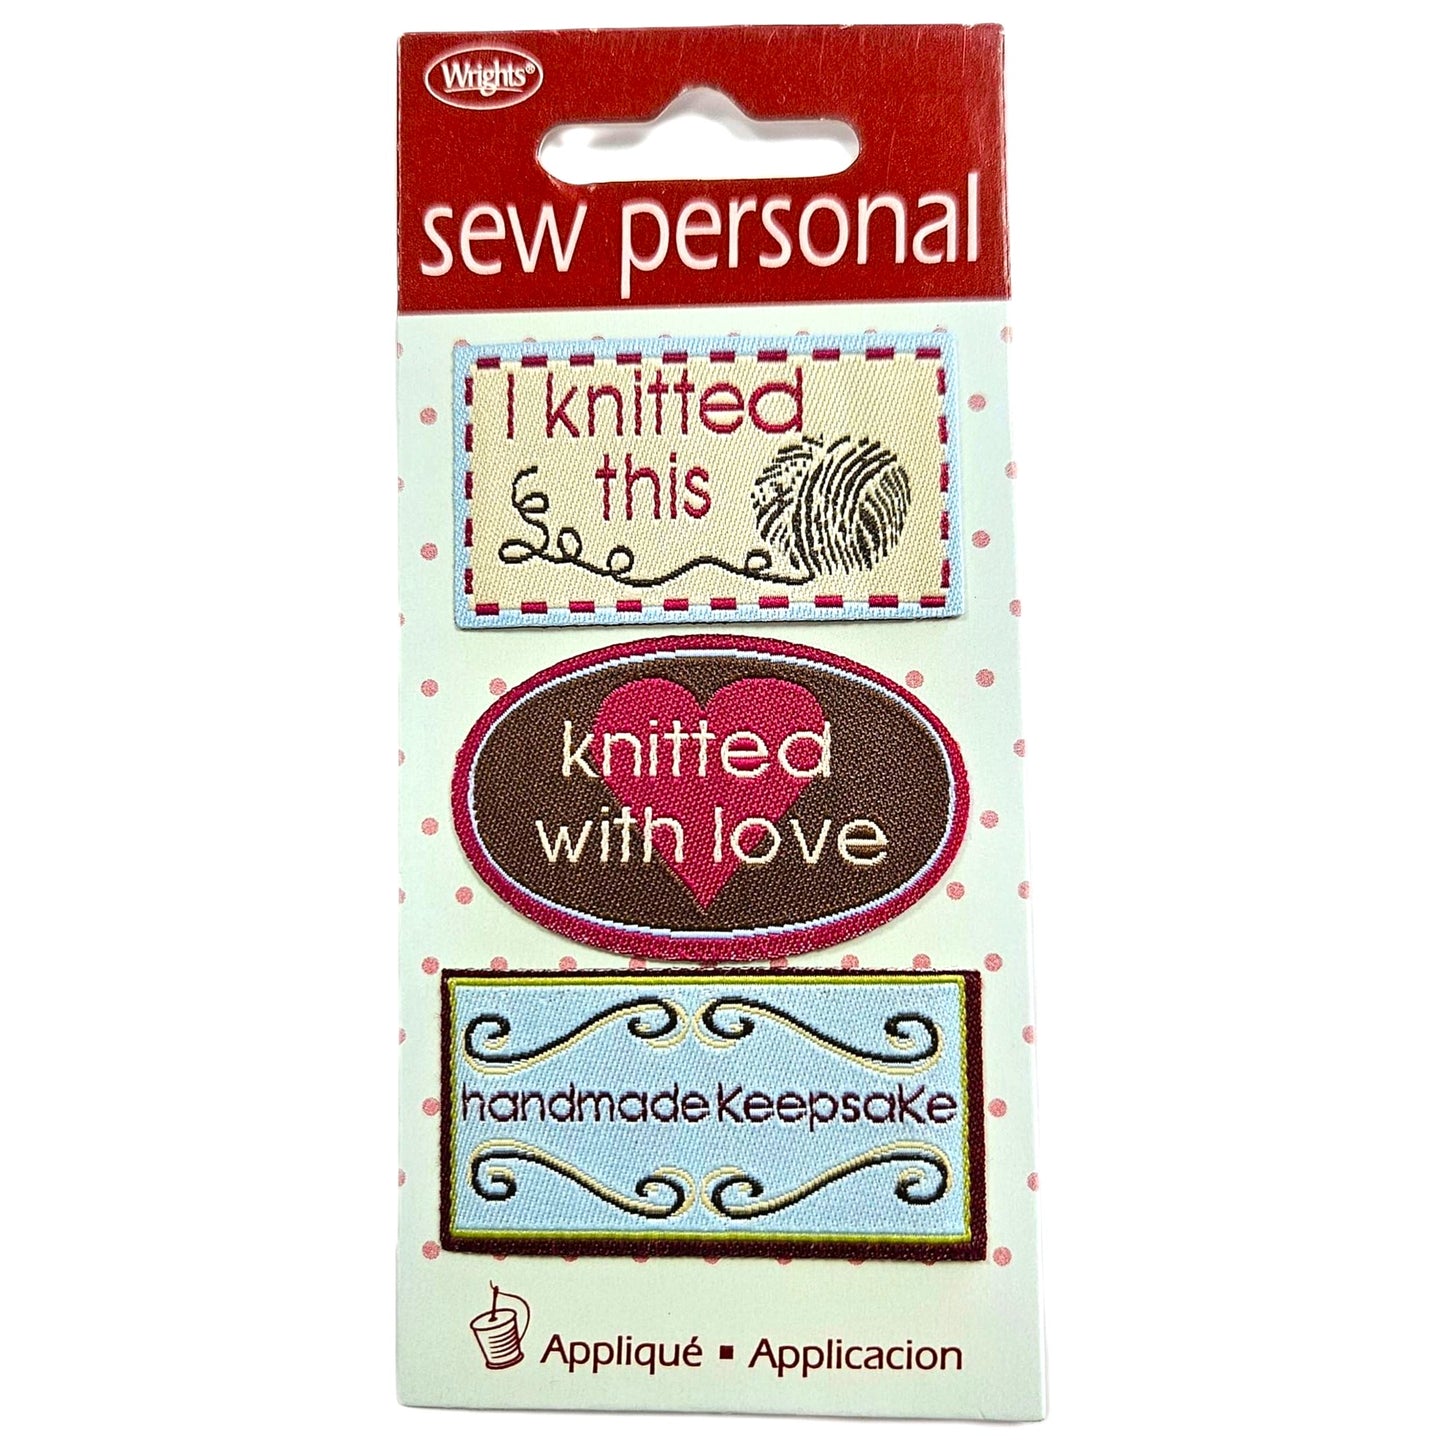 Wrights Sew Personal Iron-on Applique - Knitted with Love